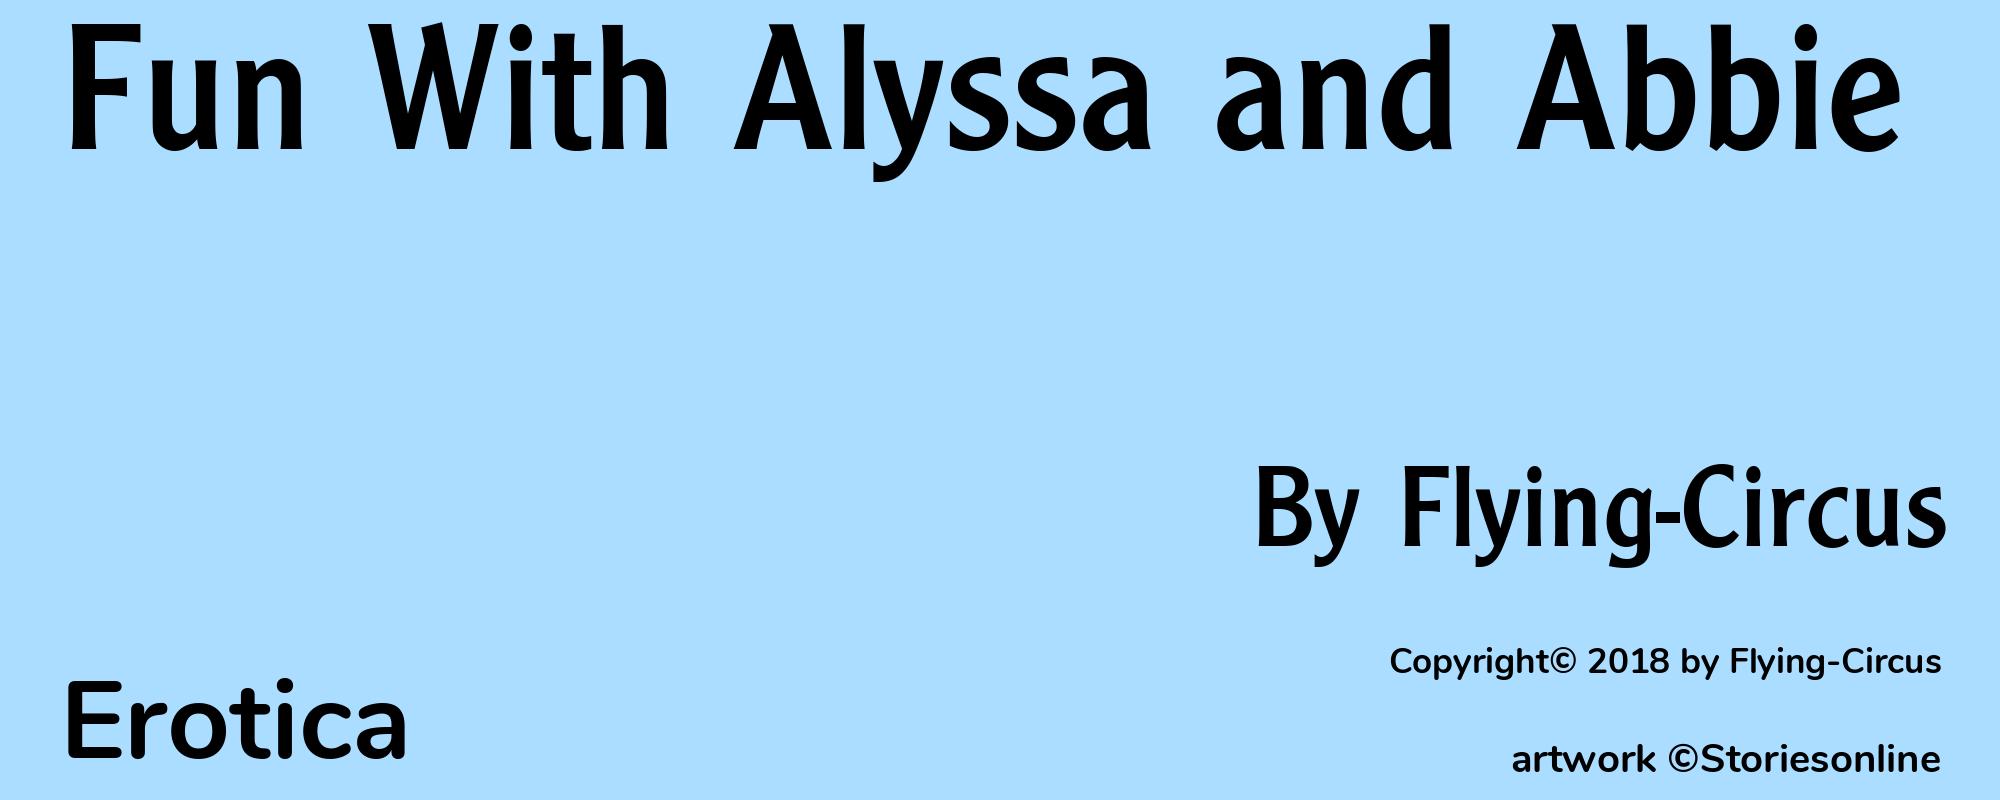 Fun With Alyssa and Abbie - Cover